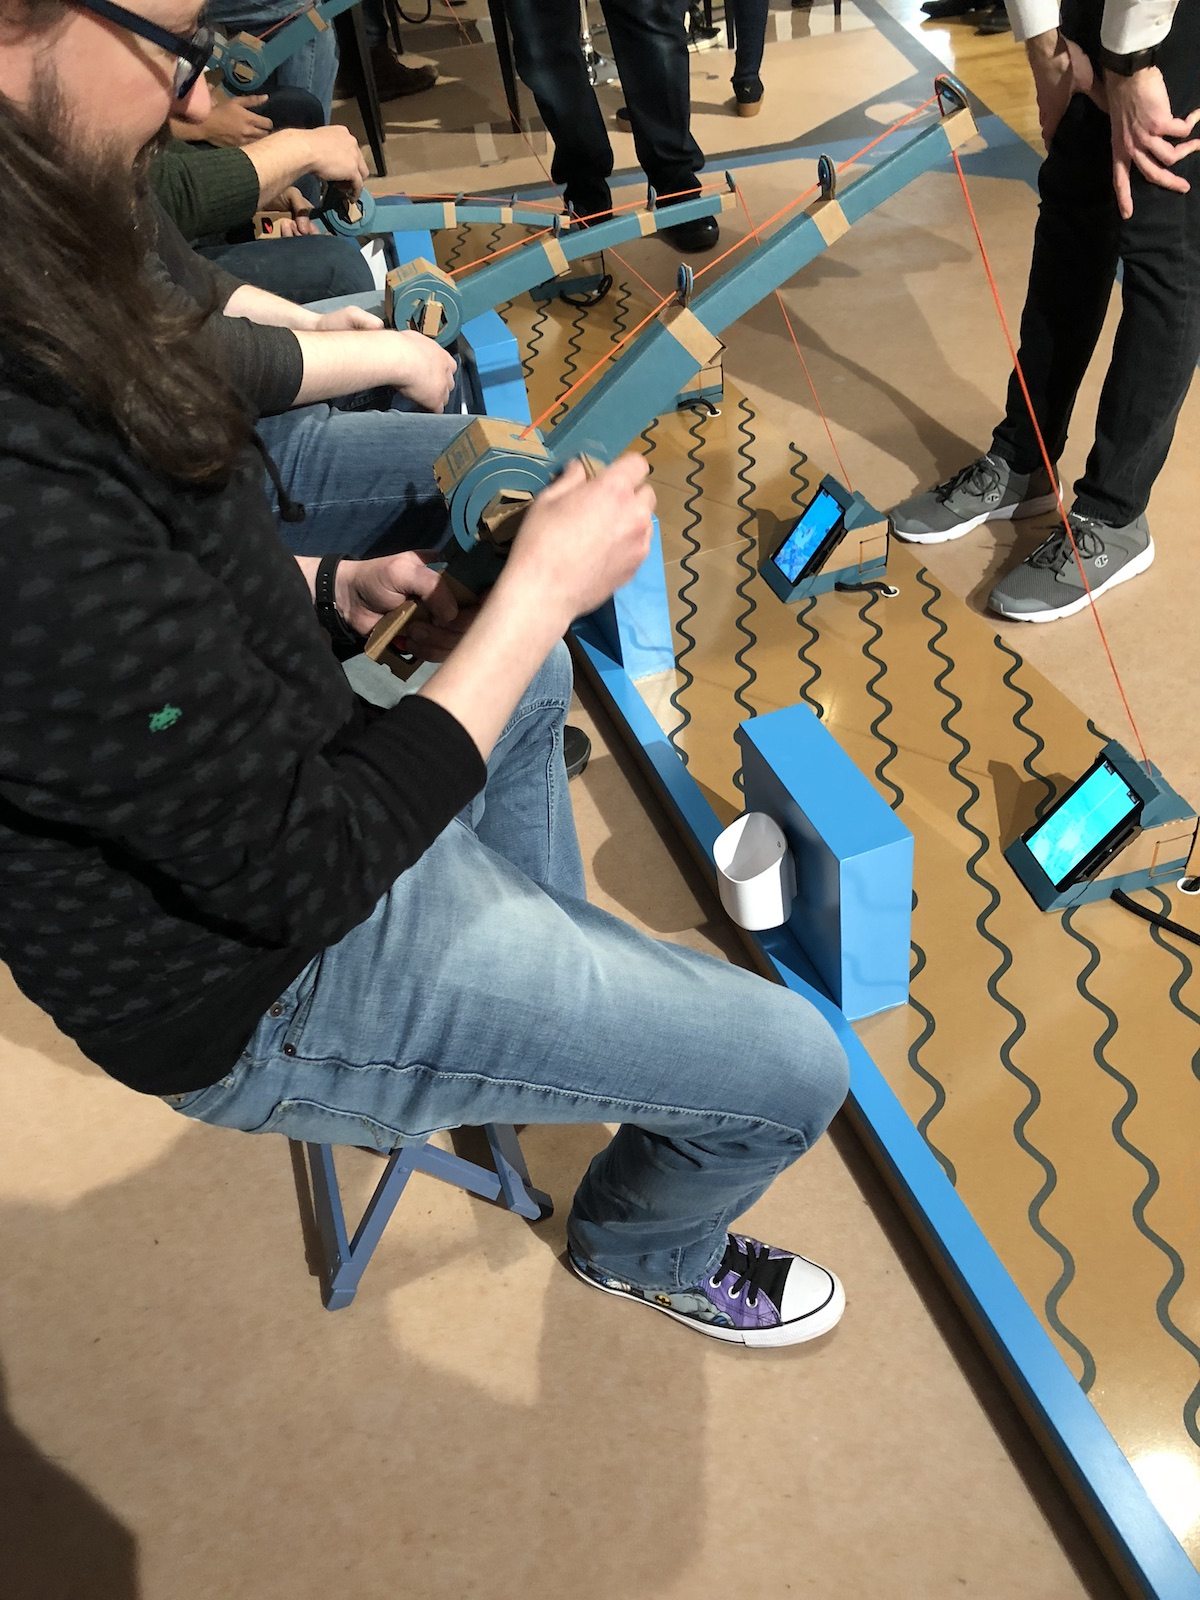 5 Essential Things to Know About Nintendo Labo Kits - GeekMom